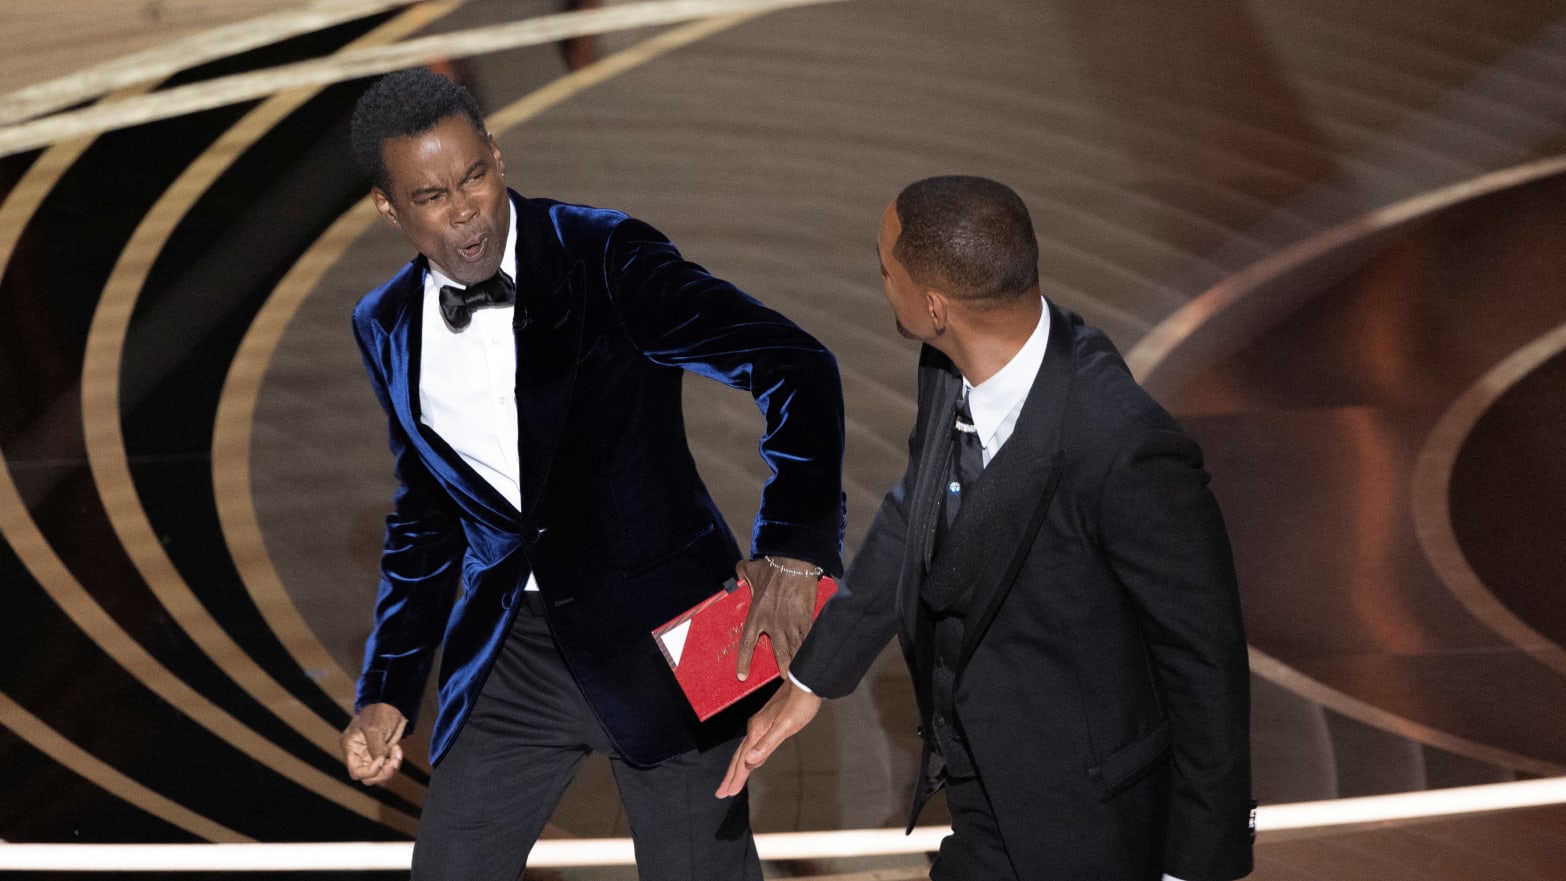 Will Smith Was Asked to Leave Oscars and Refused After Slapping Chris Rock, Academys Board of Governors Says photo